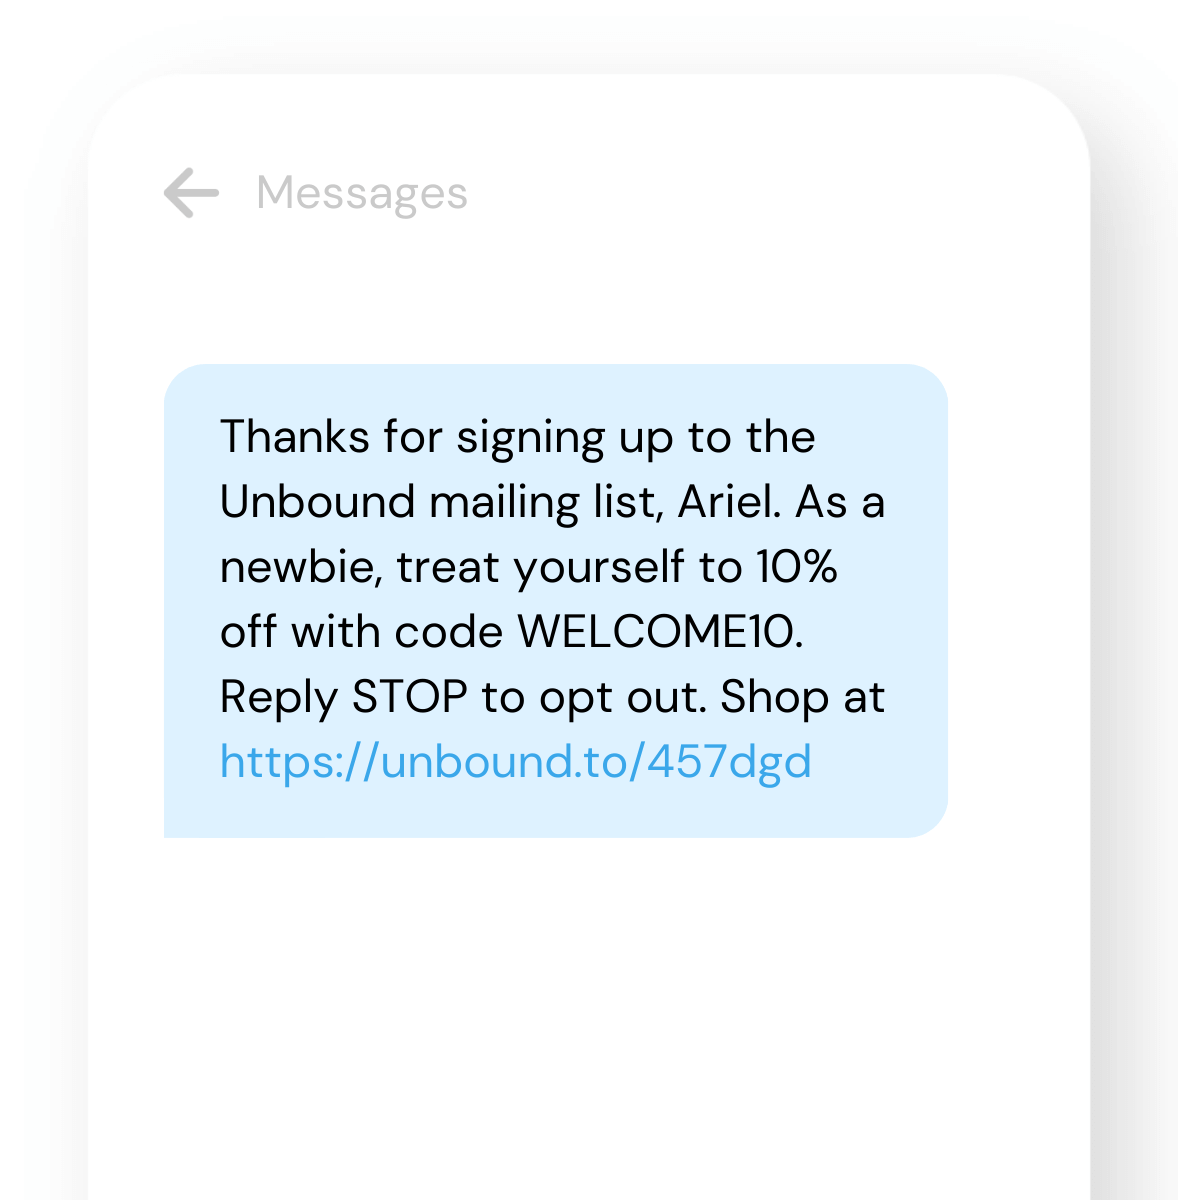 Unbound_SMS-marketing-example-welcome-message